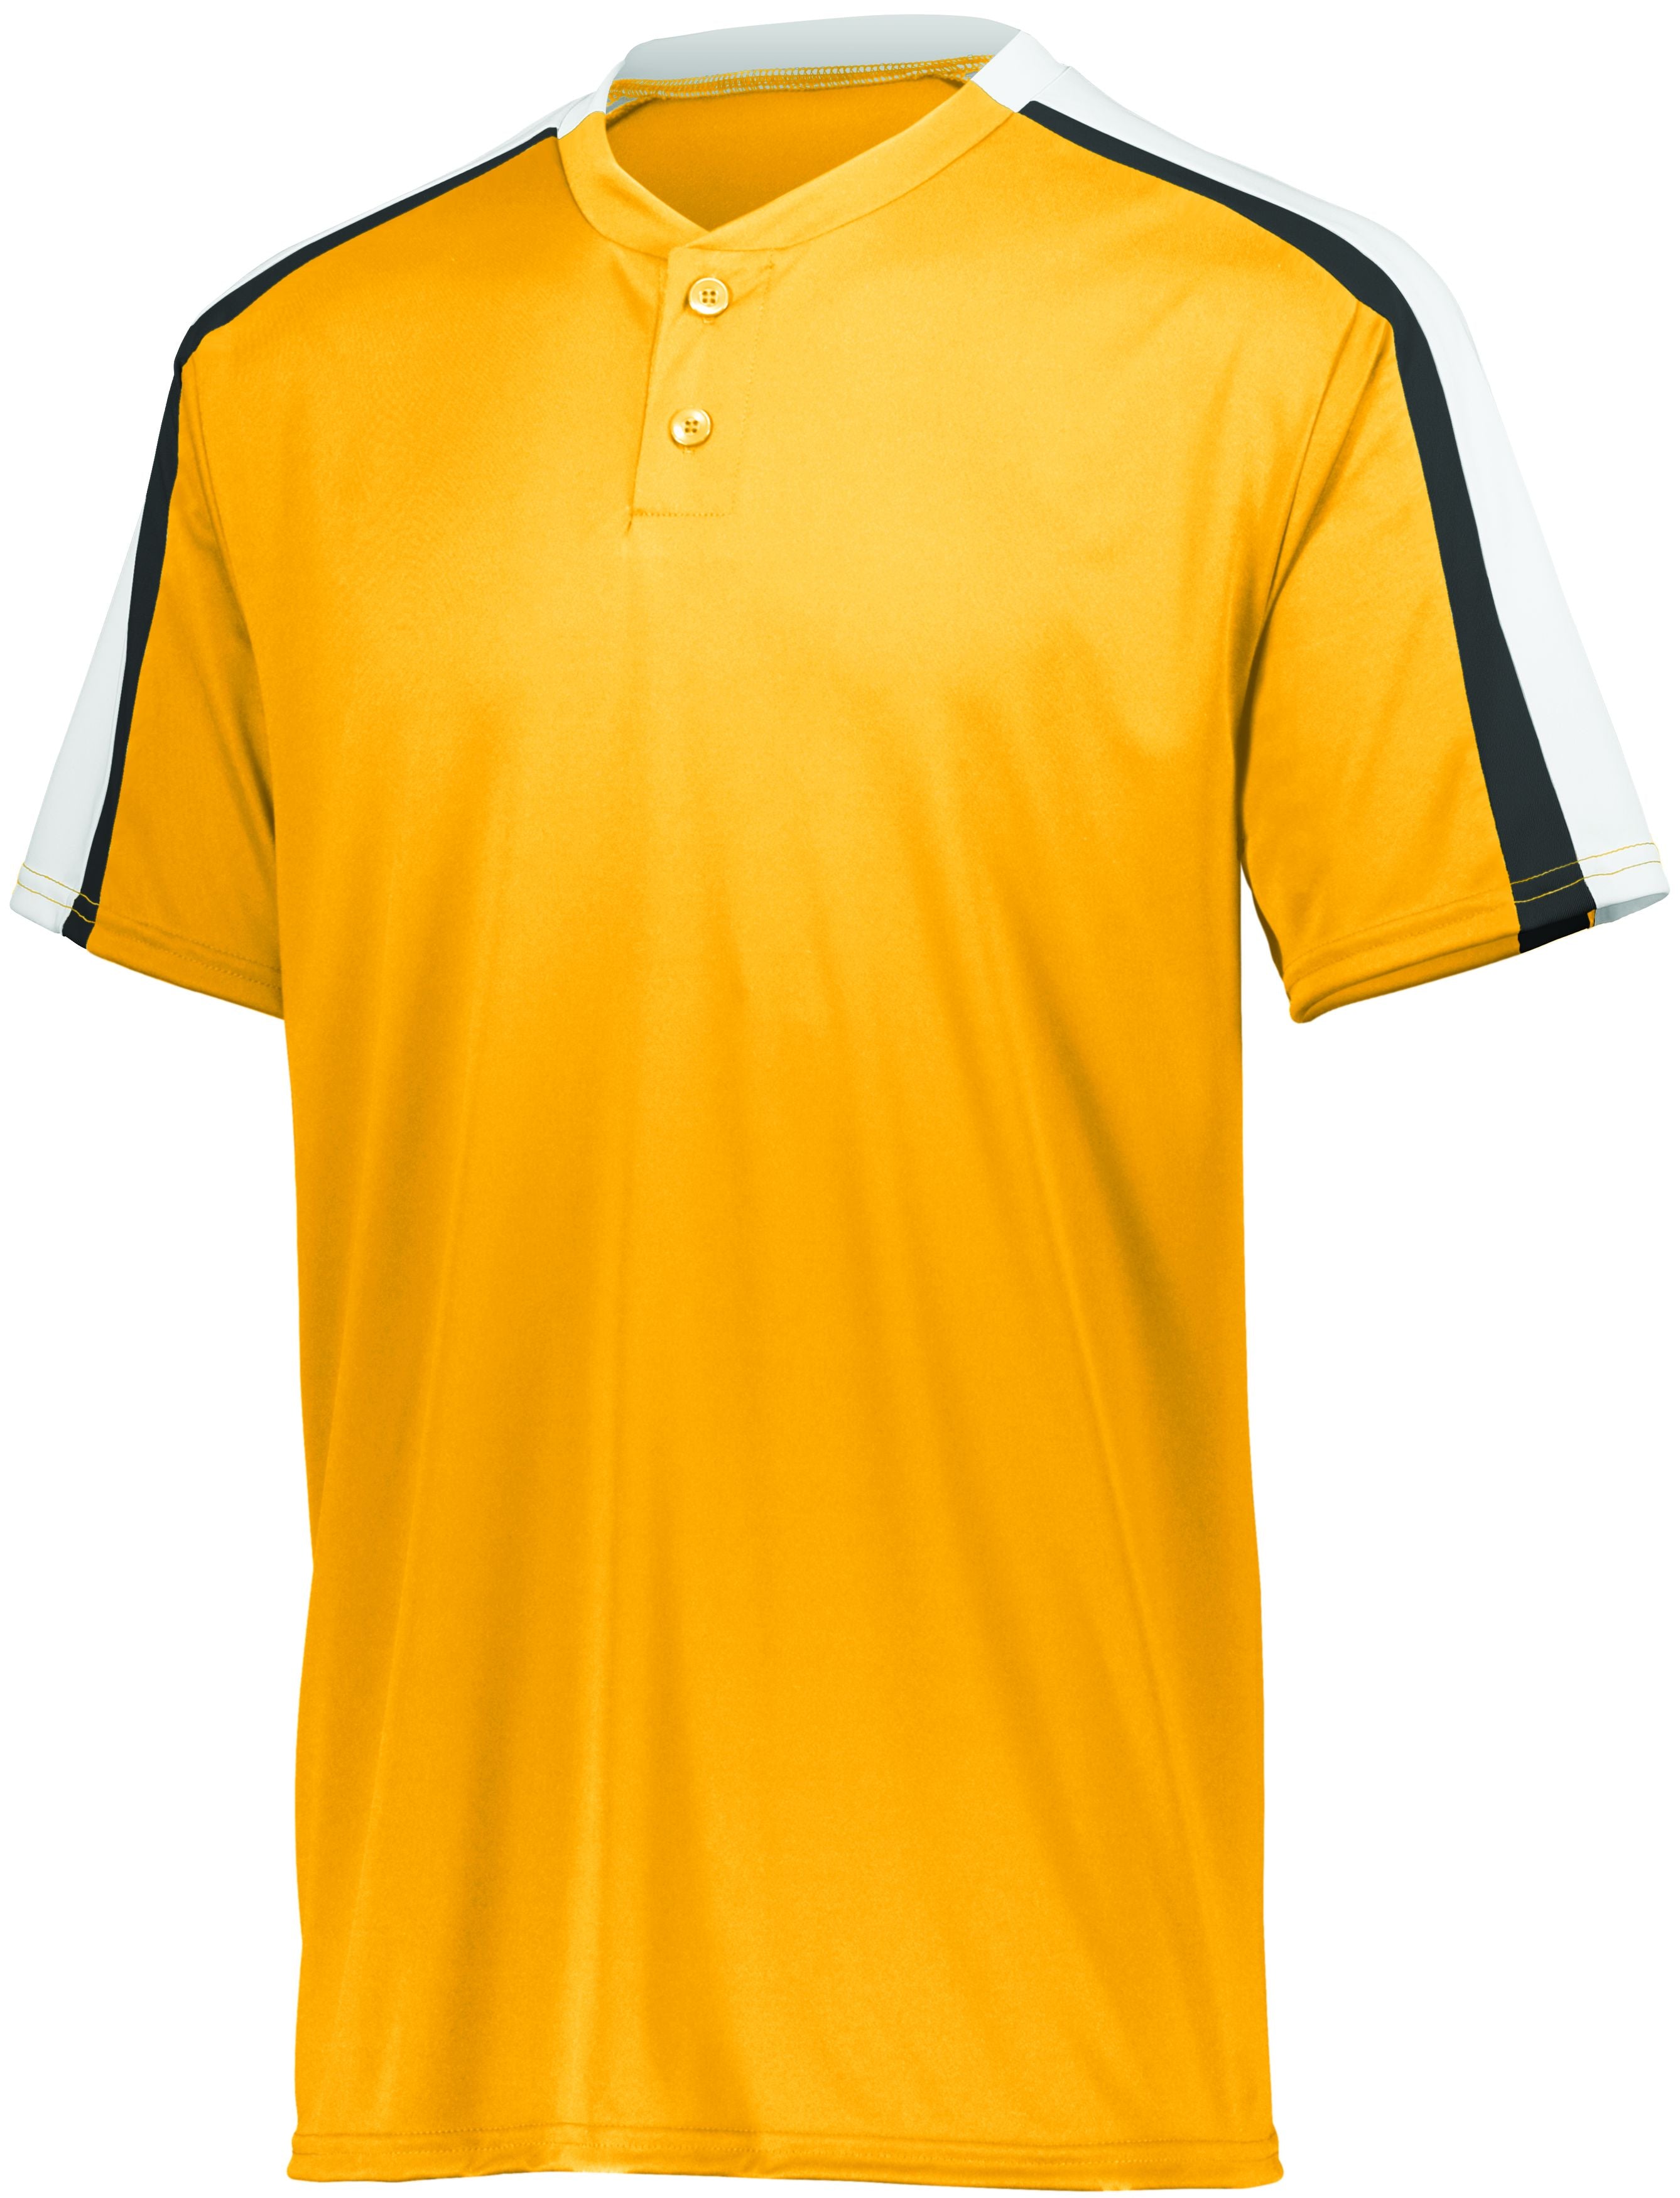 Augusta Sportswear Power Plus Jersey 2.0 in Gold/White/Black  -Part of the Adult, Adult-Jersey, Augusta-Products, Baseball, Shirts, All-Sports, All-Sports-1 product lines at KanaleyCreations.com